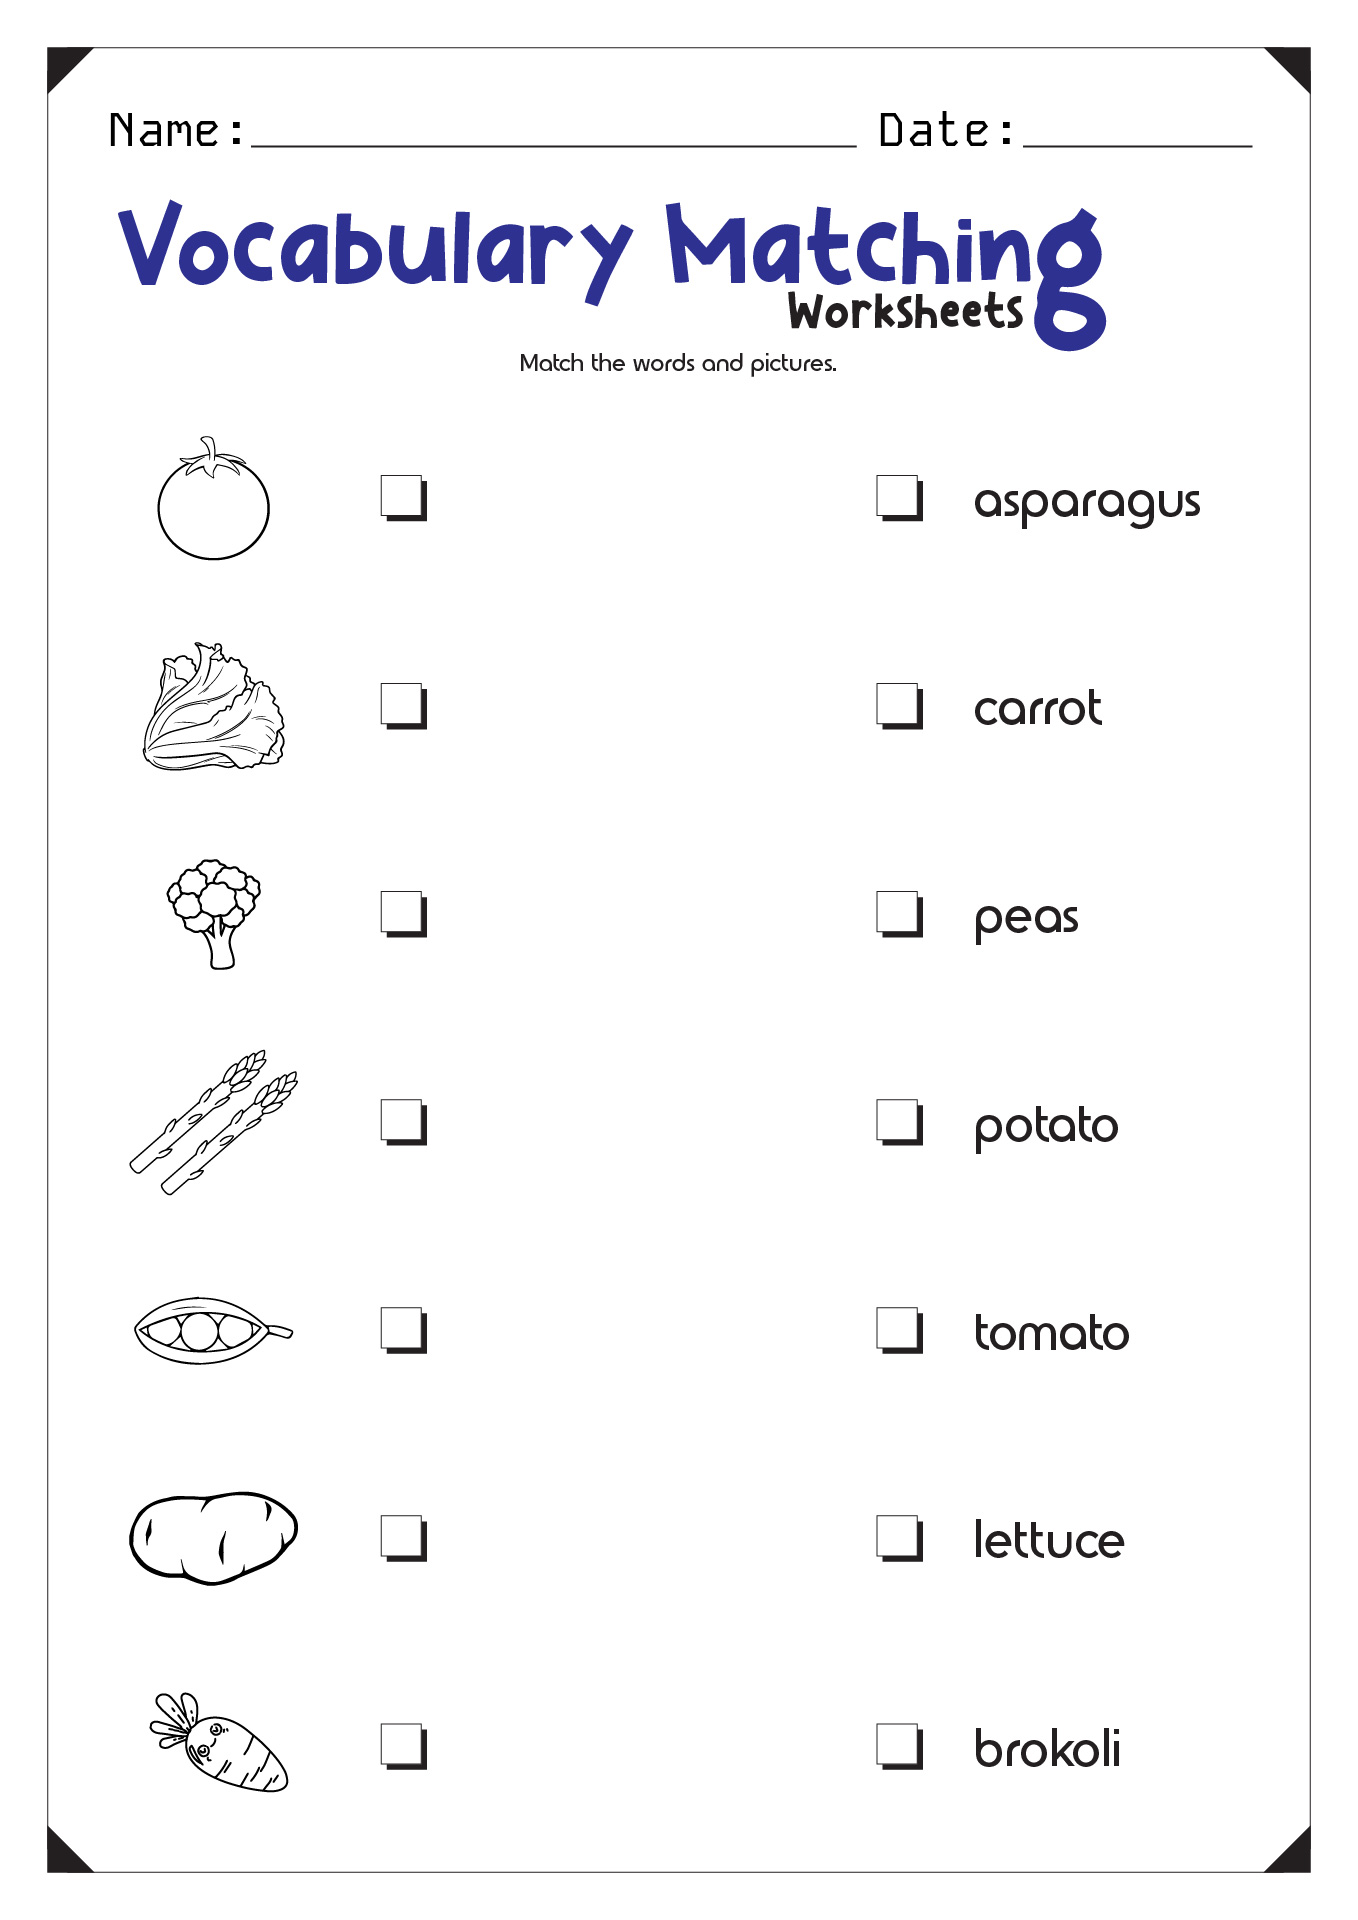 14-best-images-of-matching-definitions-to-words-worksheets-2nd-grade